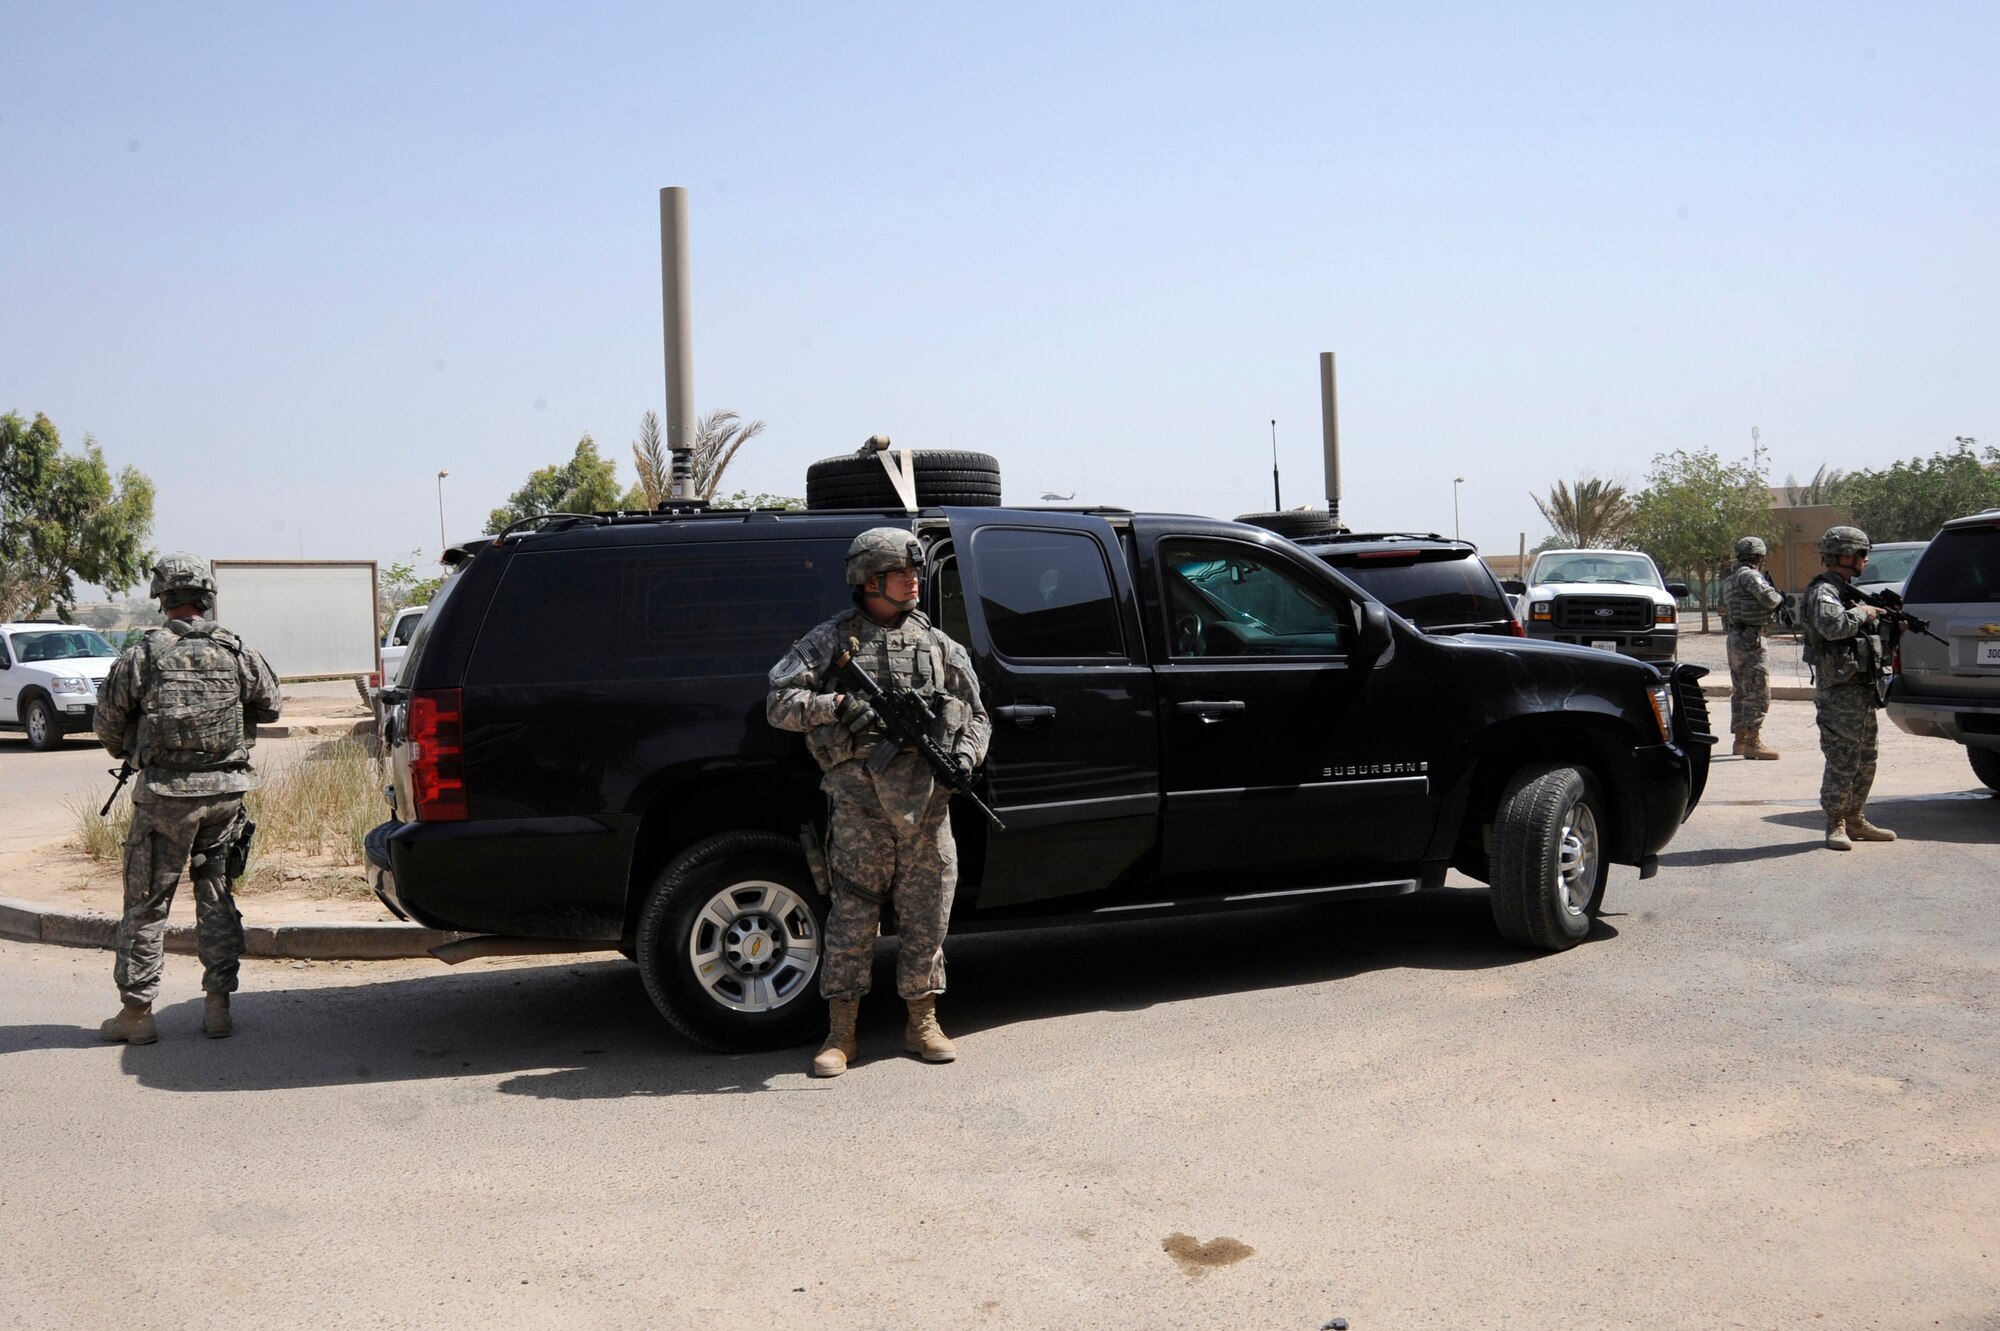 BAGHDAD, Iraq - A personal security detail posts area security before the person they are protecting exits the vehicle here July 20, 2009. The team provides constant security to ensure the individual is transported safely and securely to, from and inside various locations throughout the Baghdad area. This security team is comprised of soldiers from the 2nd Brigade Heavy Combat Team, 1st Infantry Division, Fort Riley, Kan., and an Air Force Security Forces Airman from Langley Air Force Base, Va. (U.S. Air Force photo/Tech. Sgt. Johnny L. Saldivar/Released)